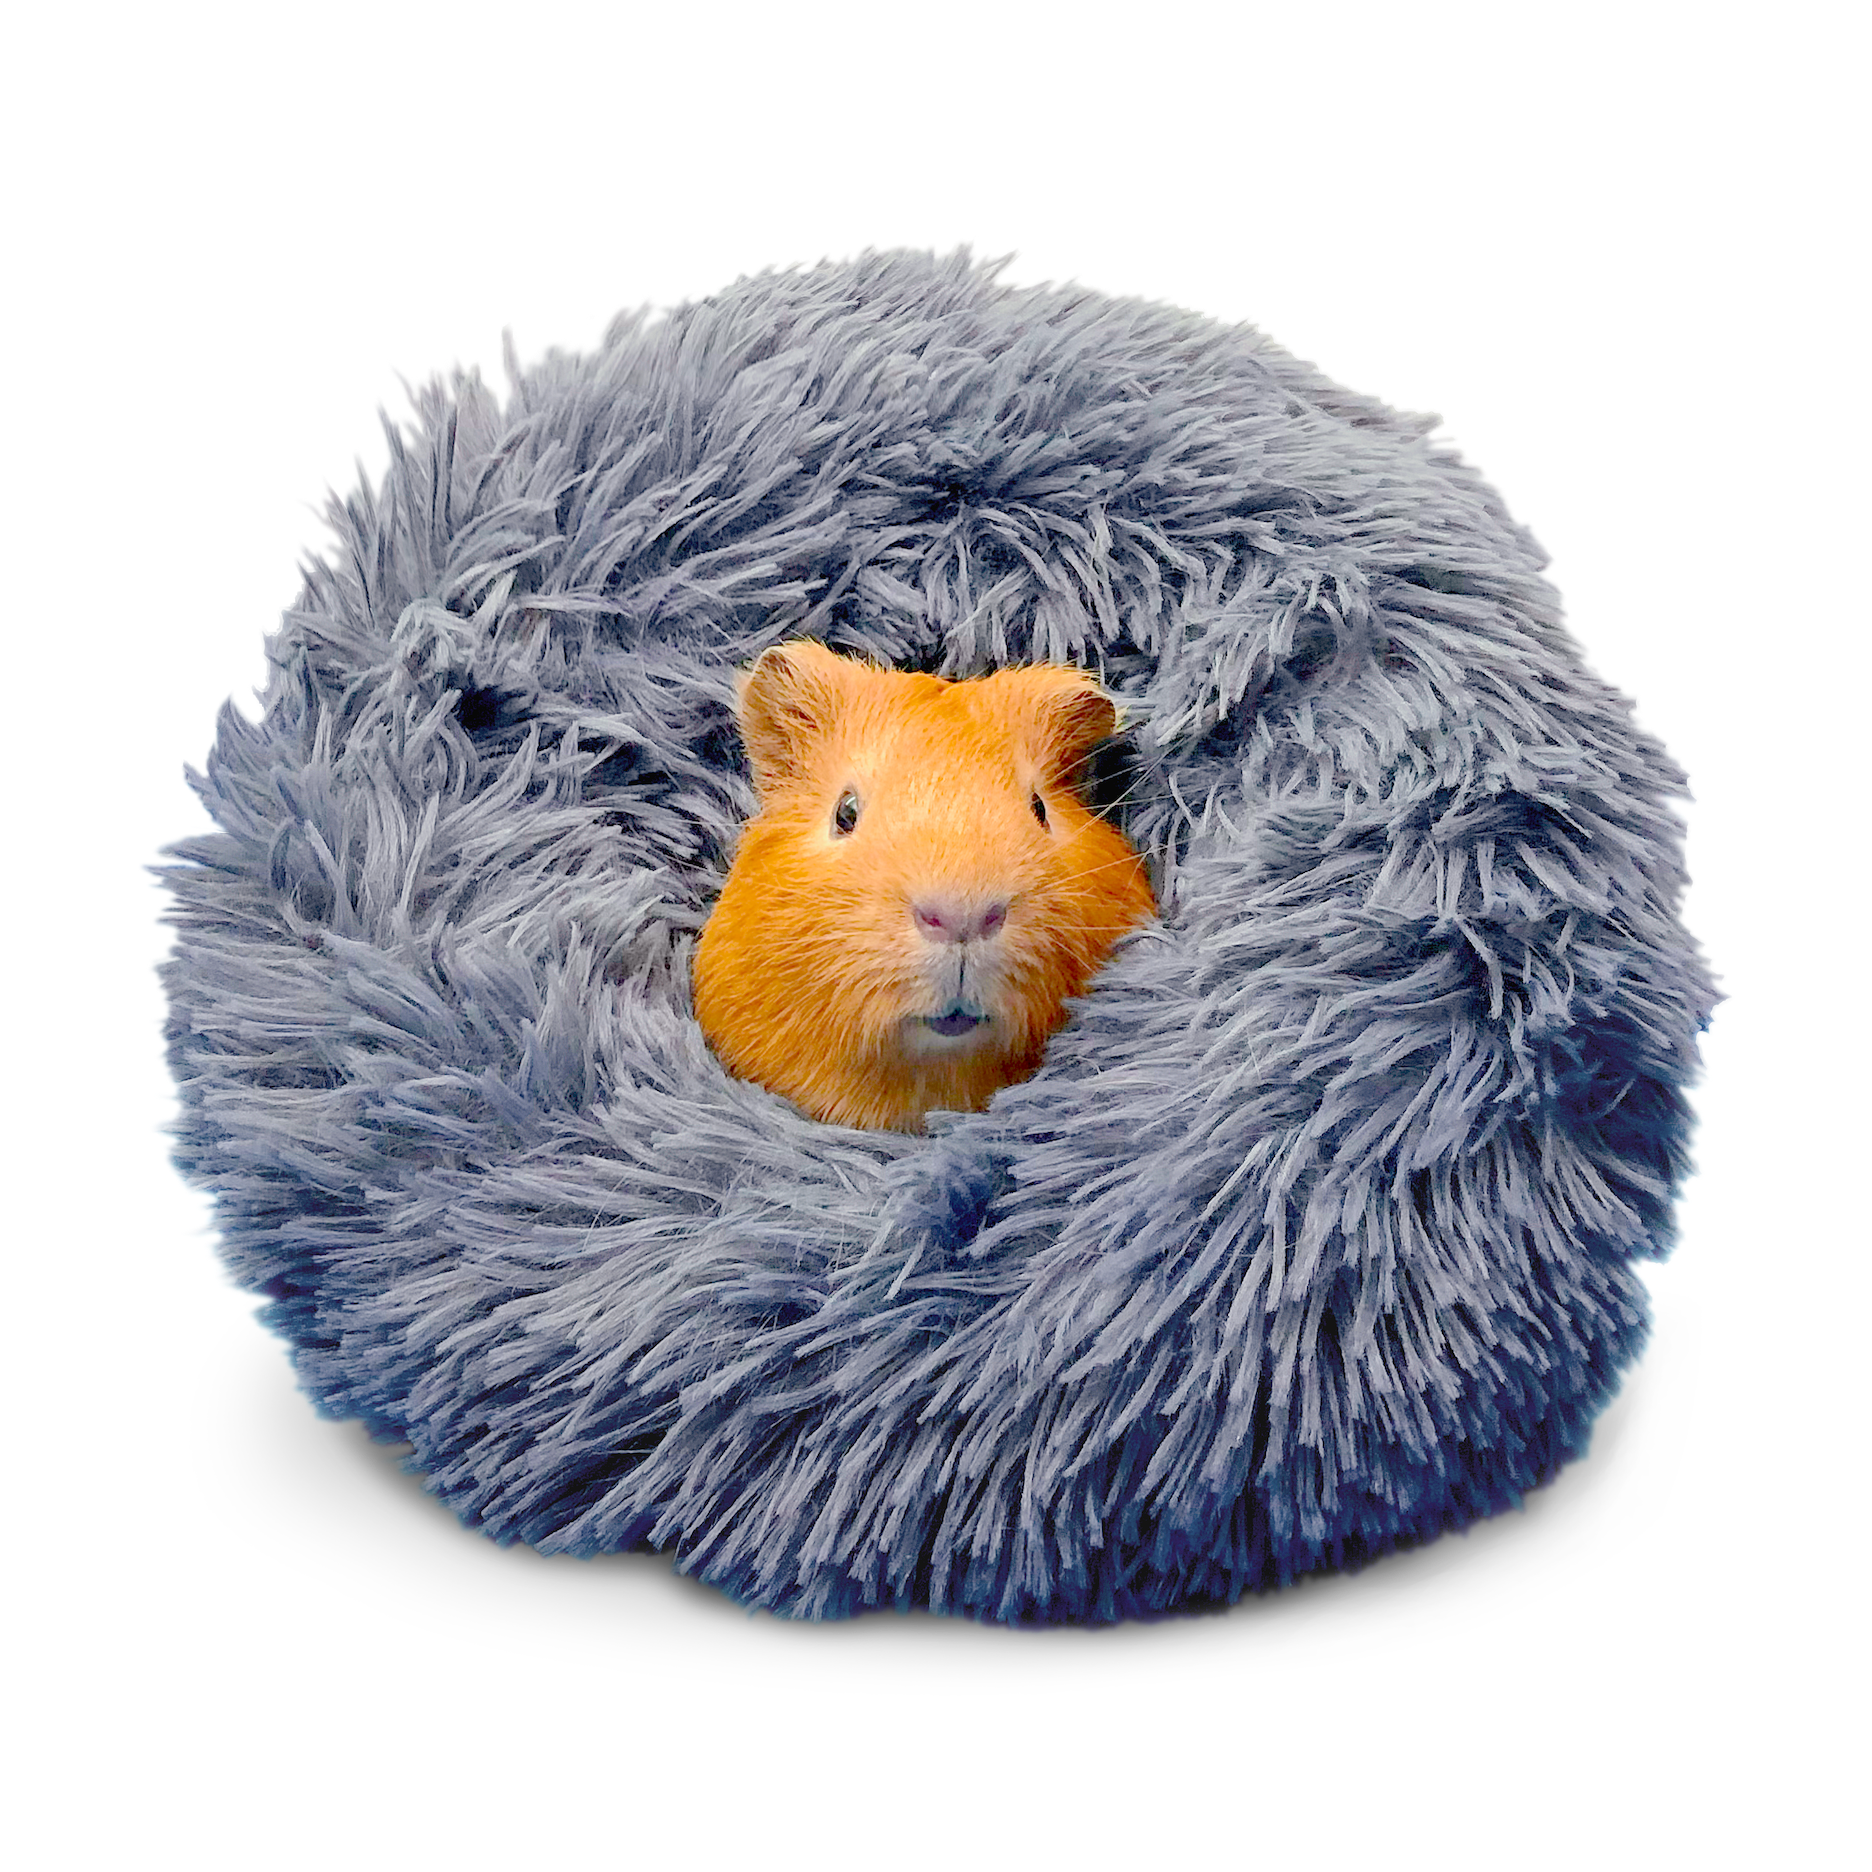 Paw Inspired® Furr-O™ Burrowing Pet Bed